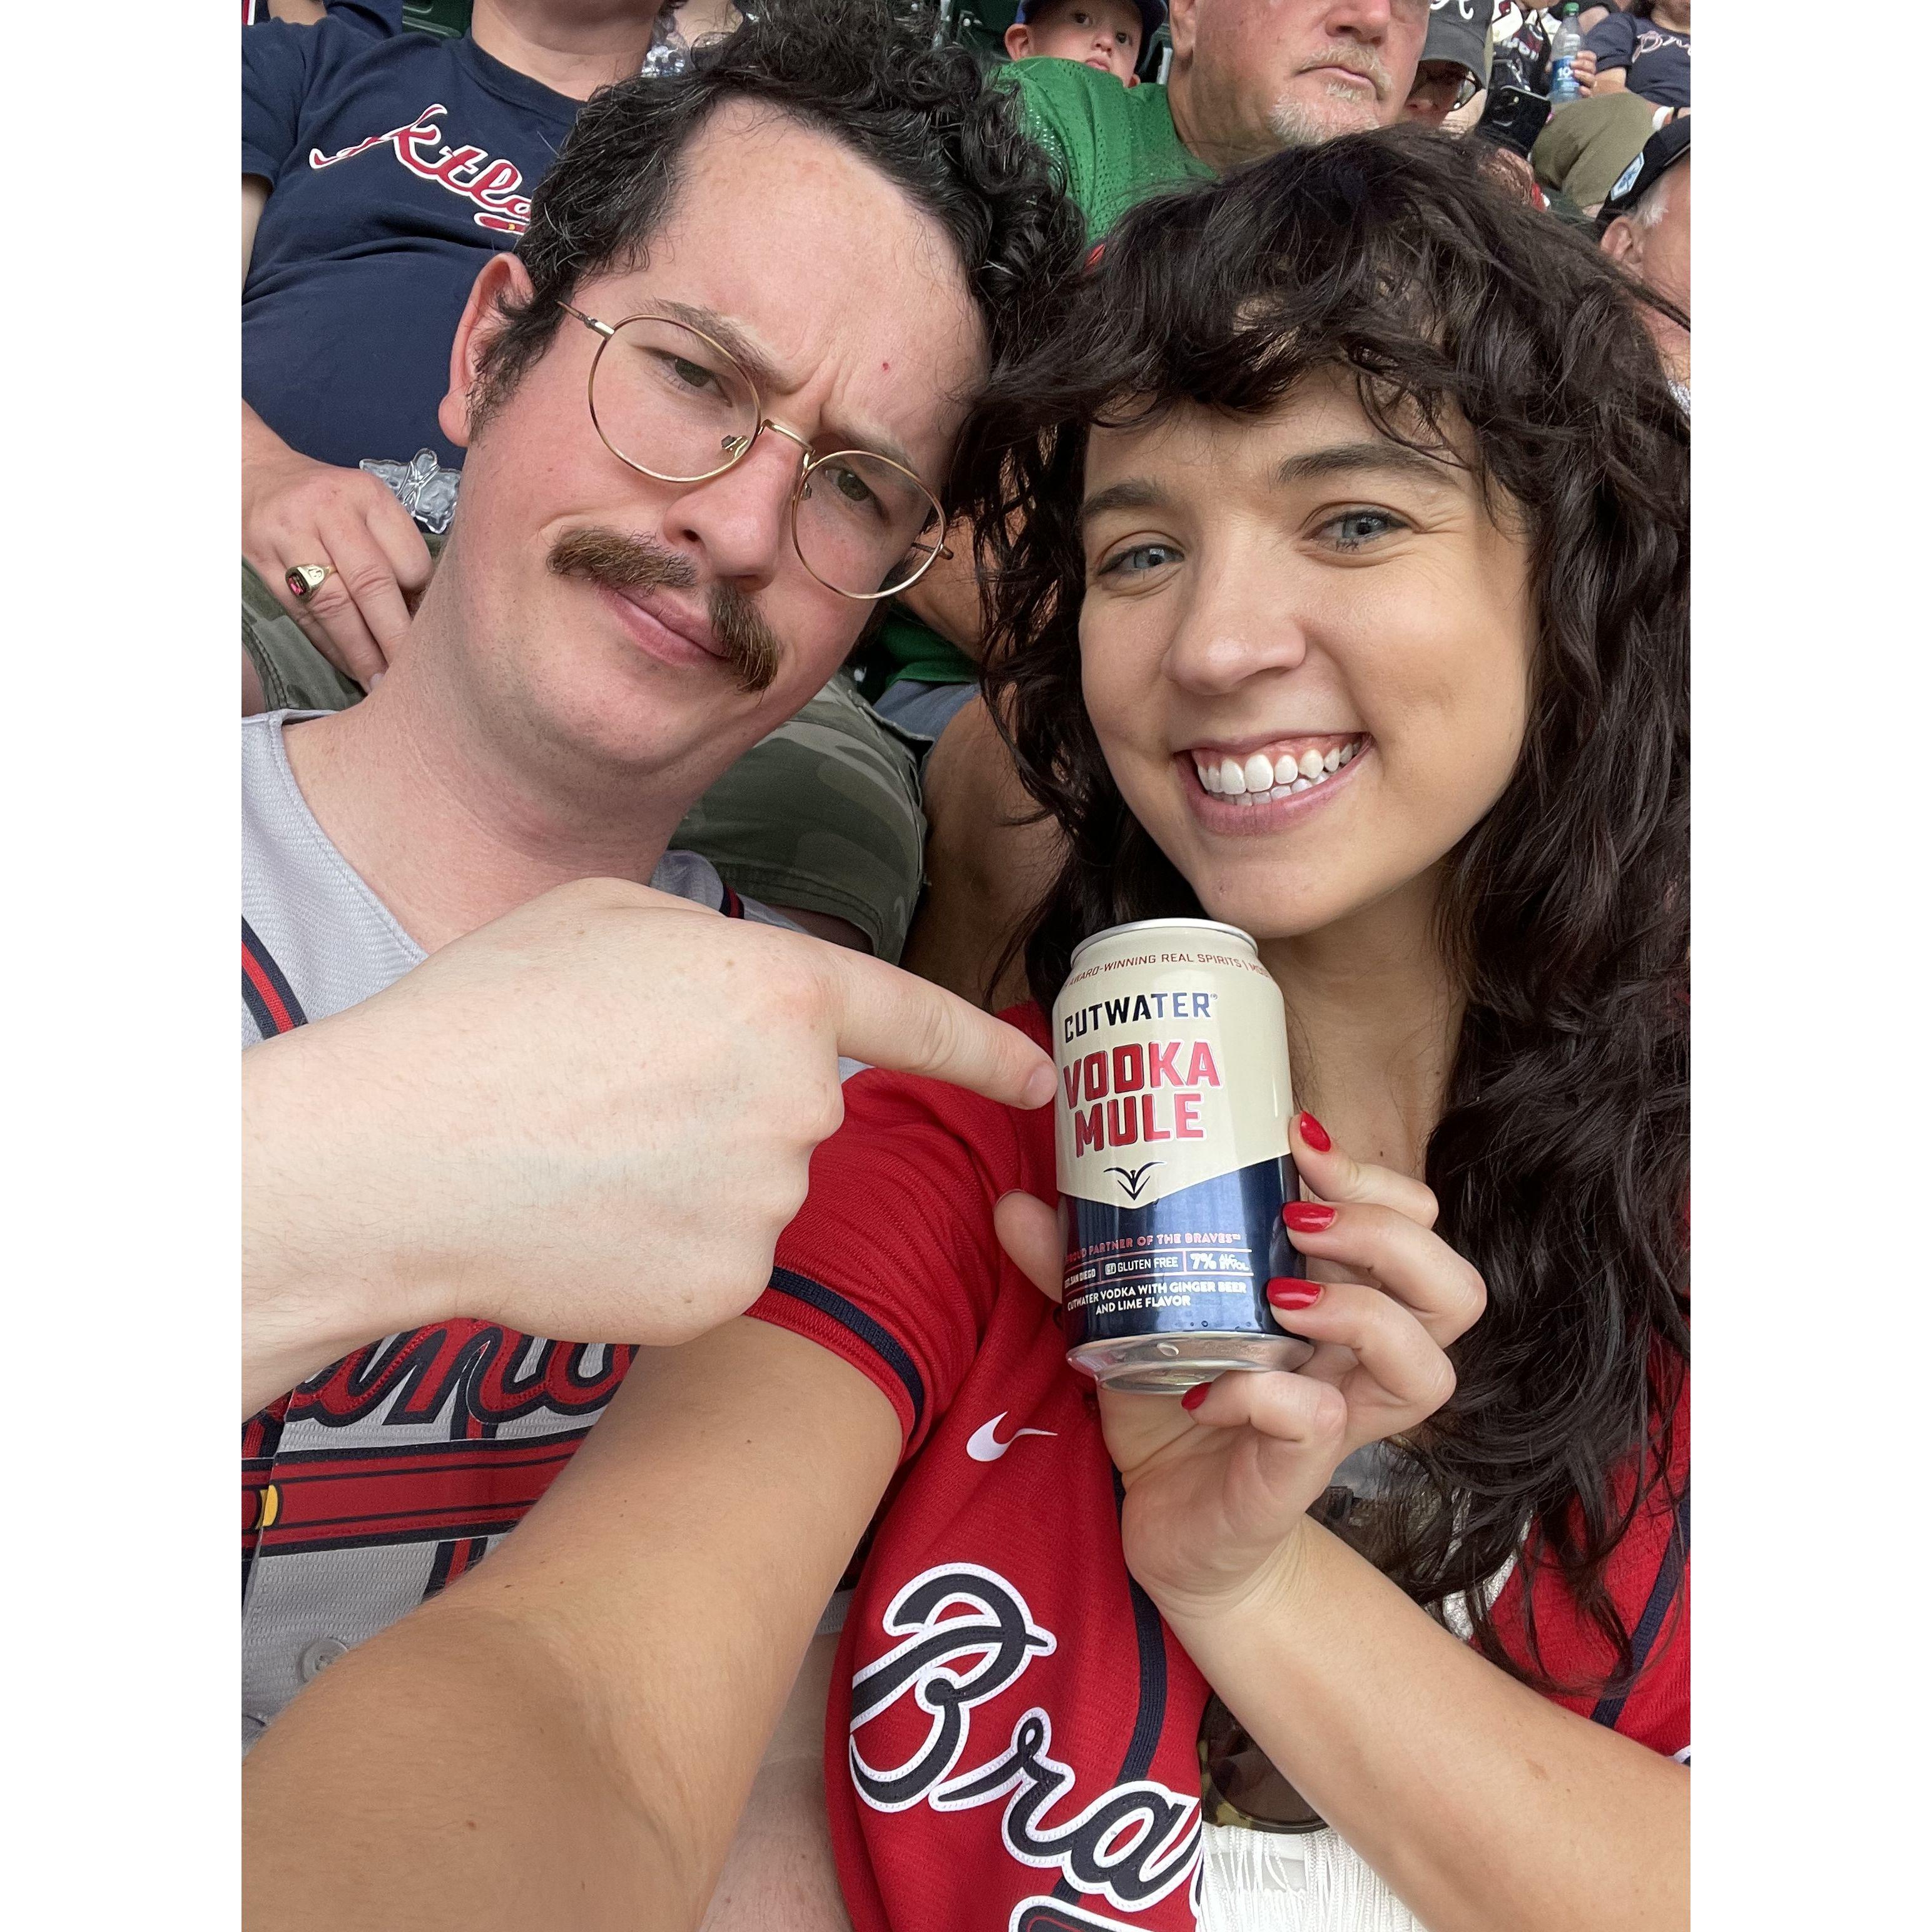 Nora goes to Braves games for cutwaters